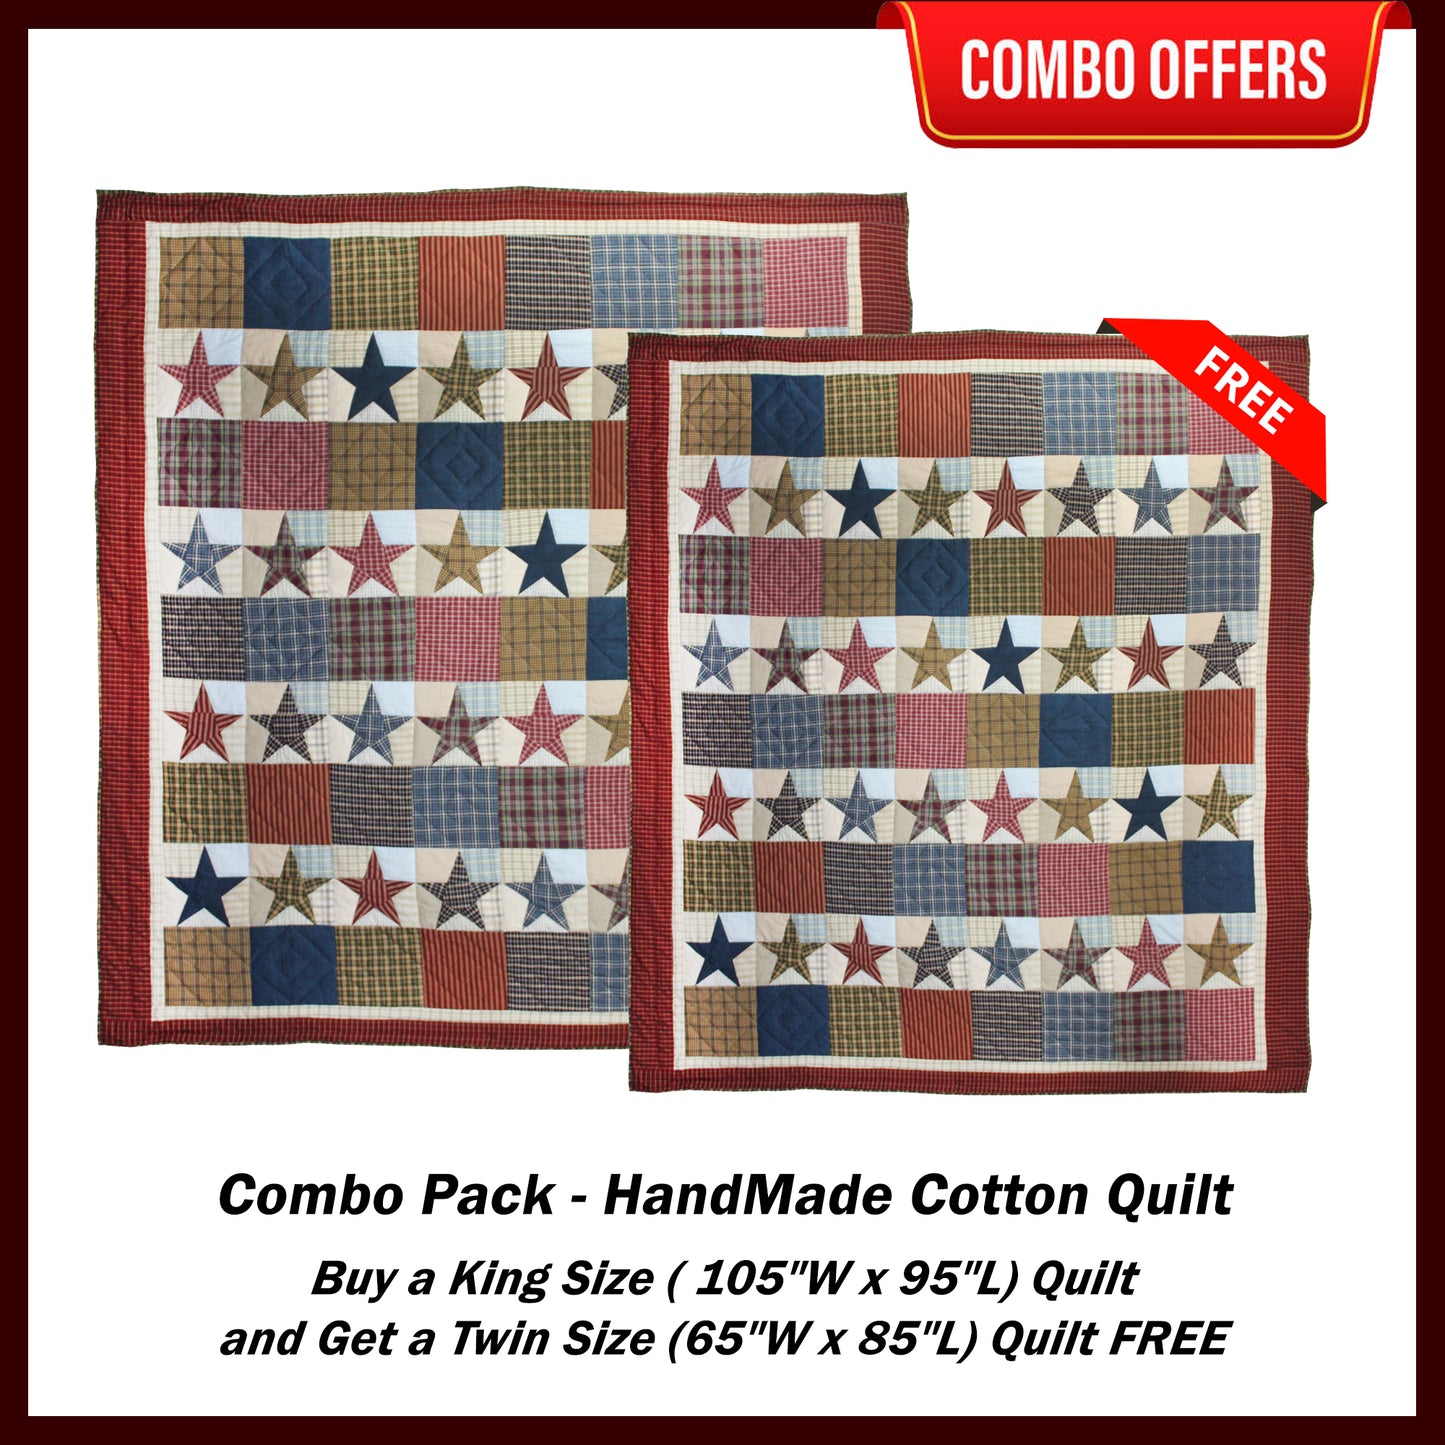 Stars and Squares Handmade Cotton Quilt - Buy a King Size Quilt and Get a Twin Size Quilt FREE